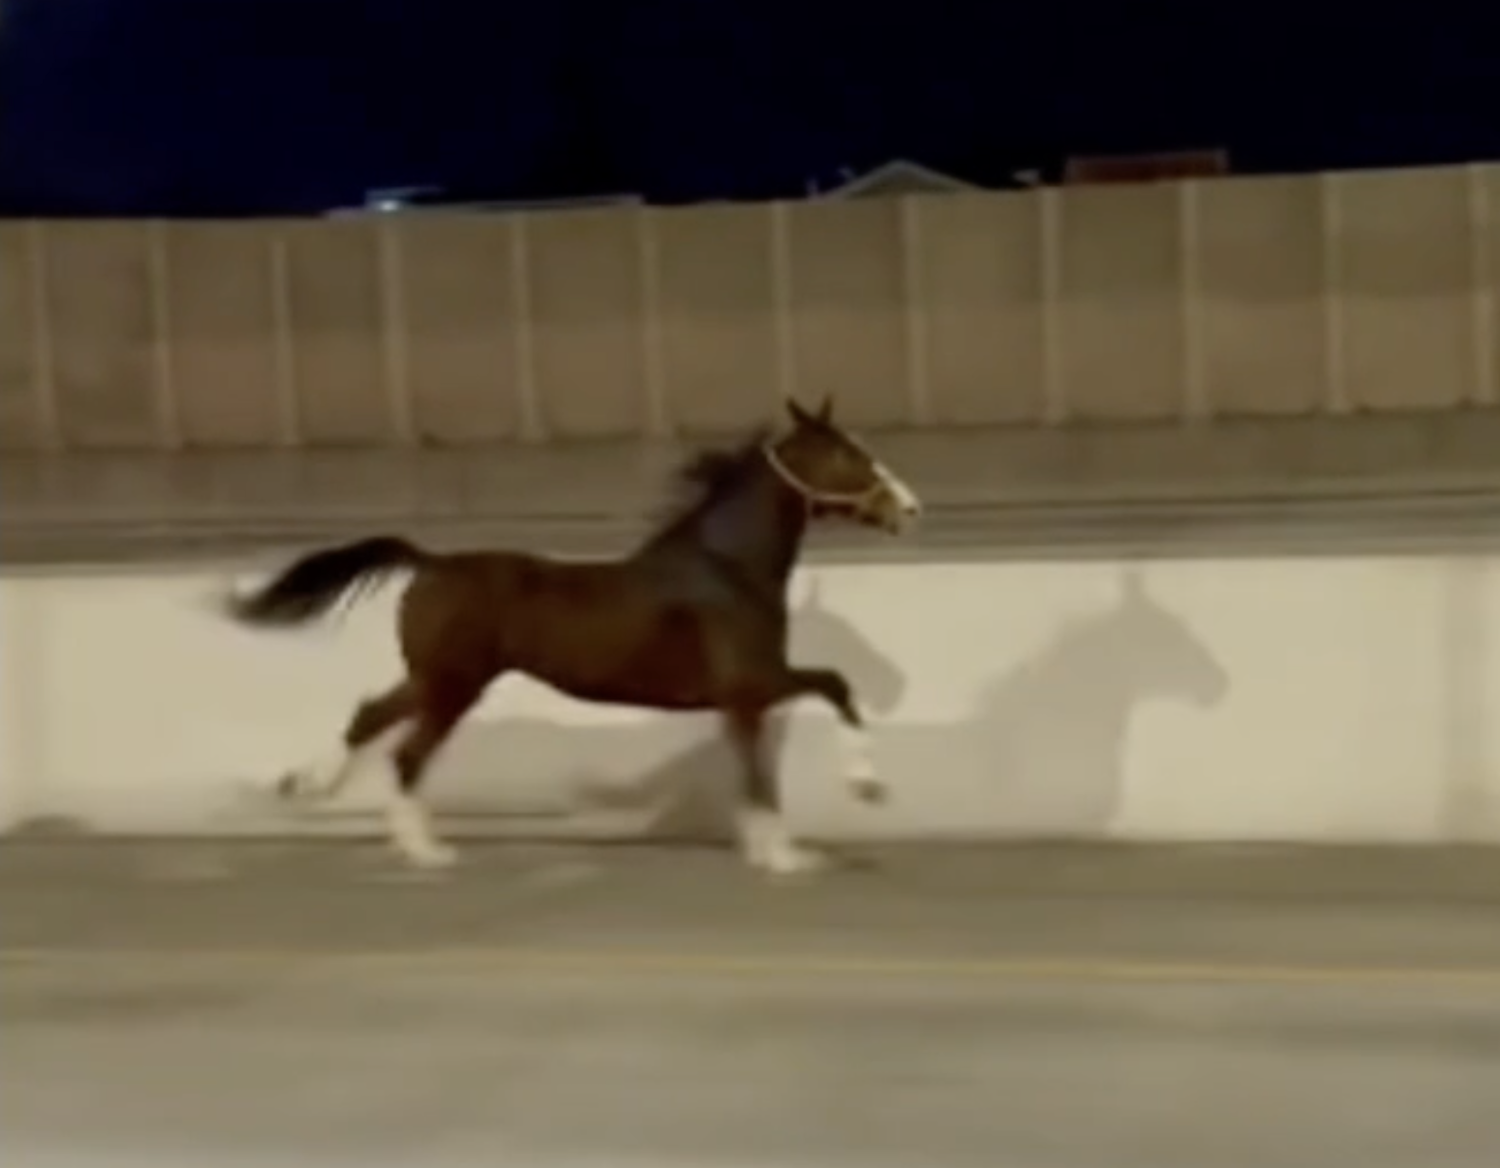 You Don’t See That Every Day (Thank Goodness!): Horse Running Down Highway in Philadelphia